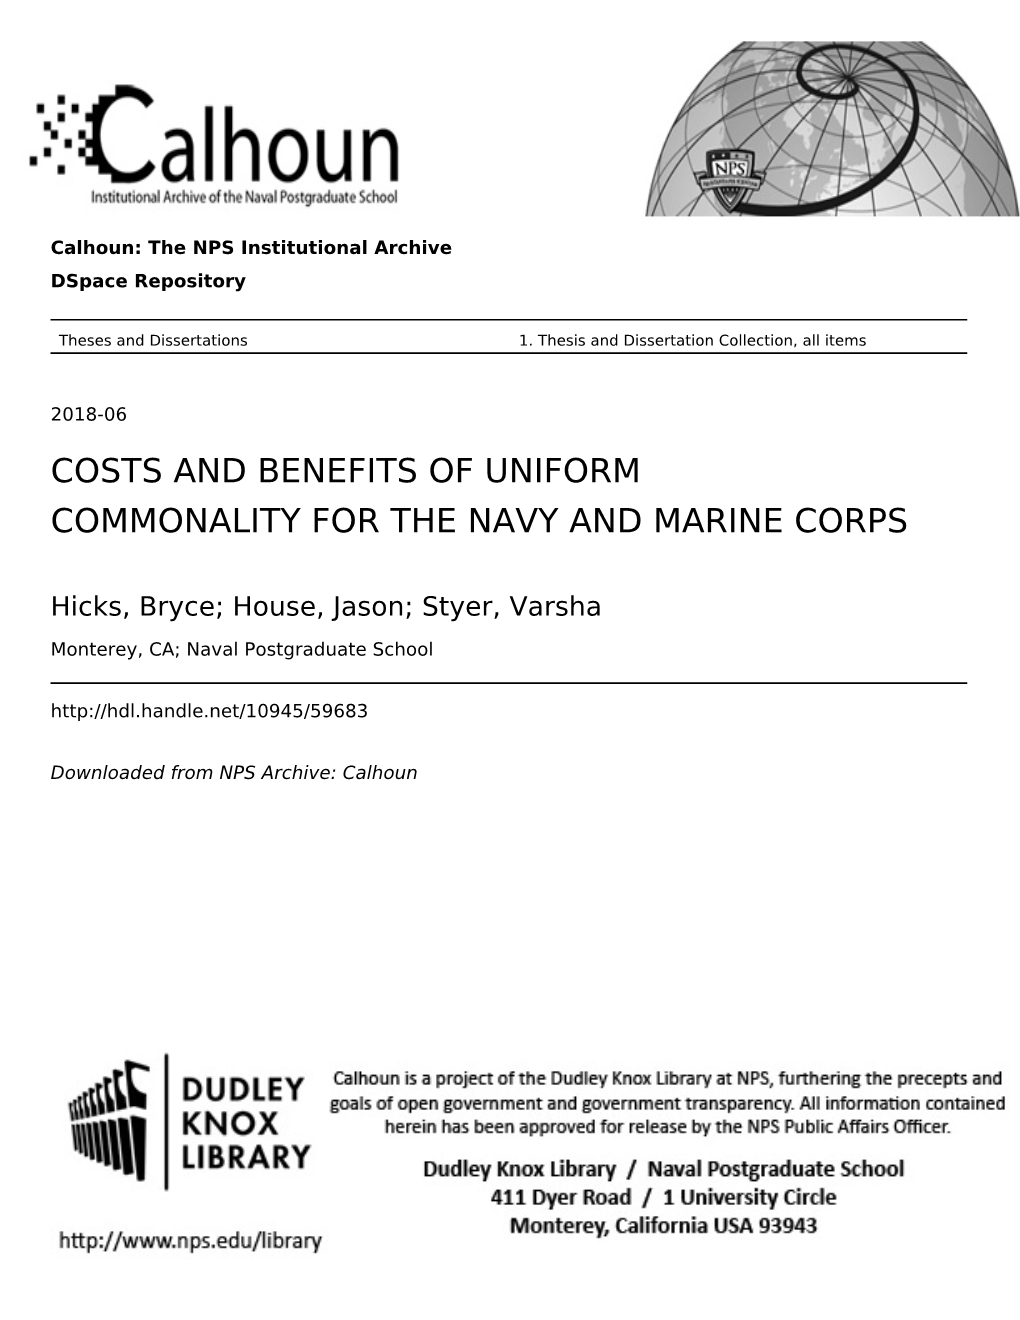 Costs and Benefits of Uniform Commonality for the Navy and Marine Corps